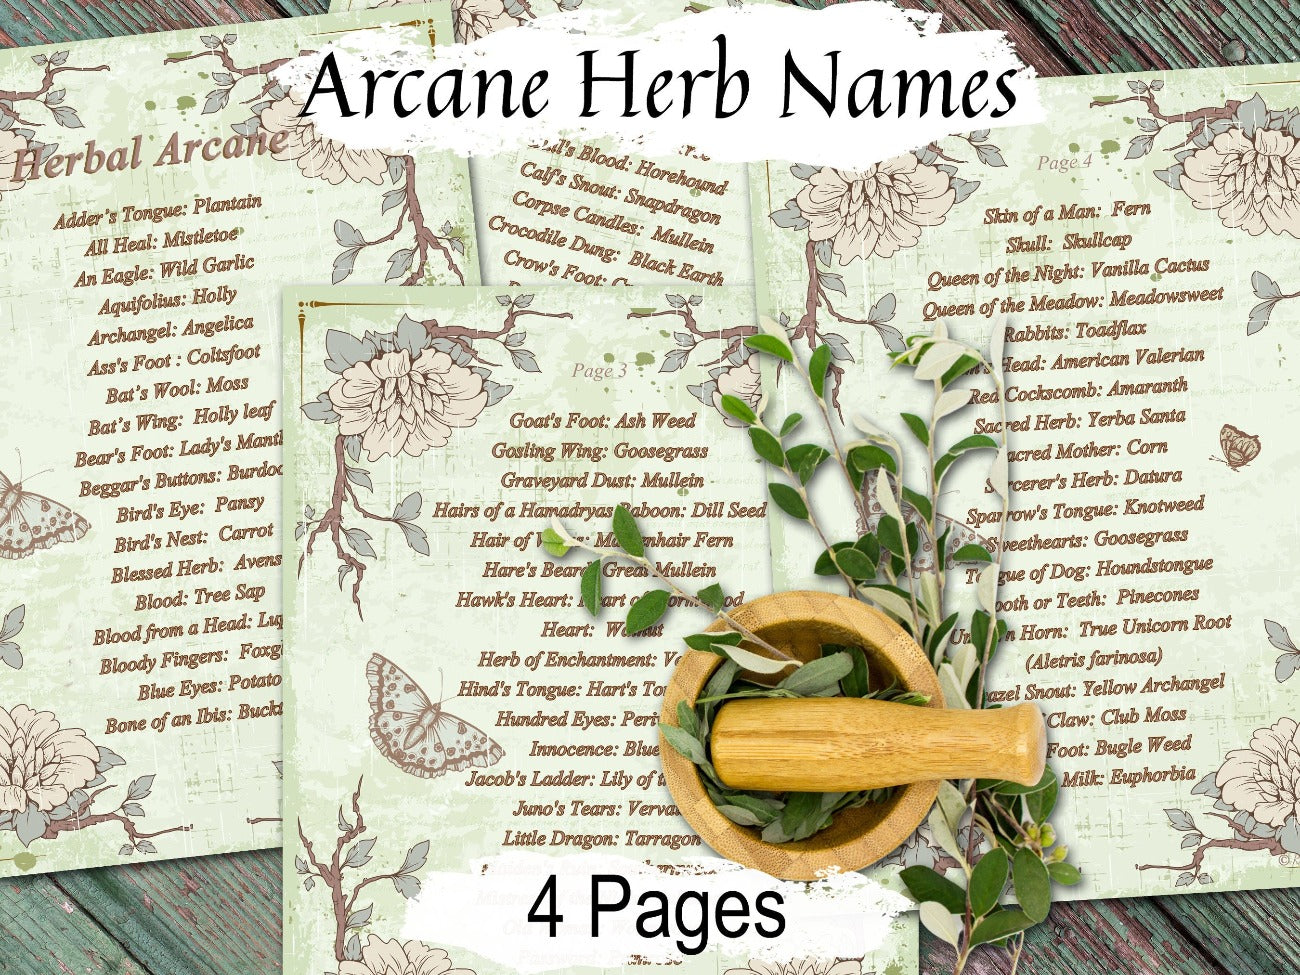 HERBAL ARCANE, Old Witchcraft Names for Common Herbs, Secret Spell Ingredients, Eye of Newt & Wing of Bat, Witch Apothecary Plants, 4 Pages - Morgana Magick Spell